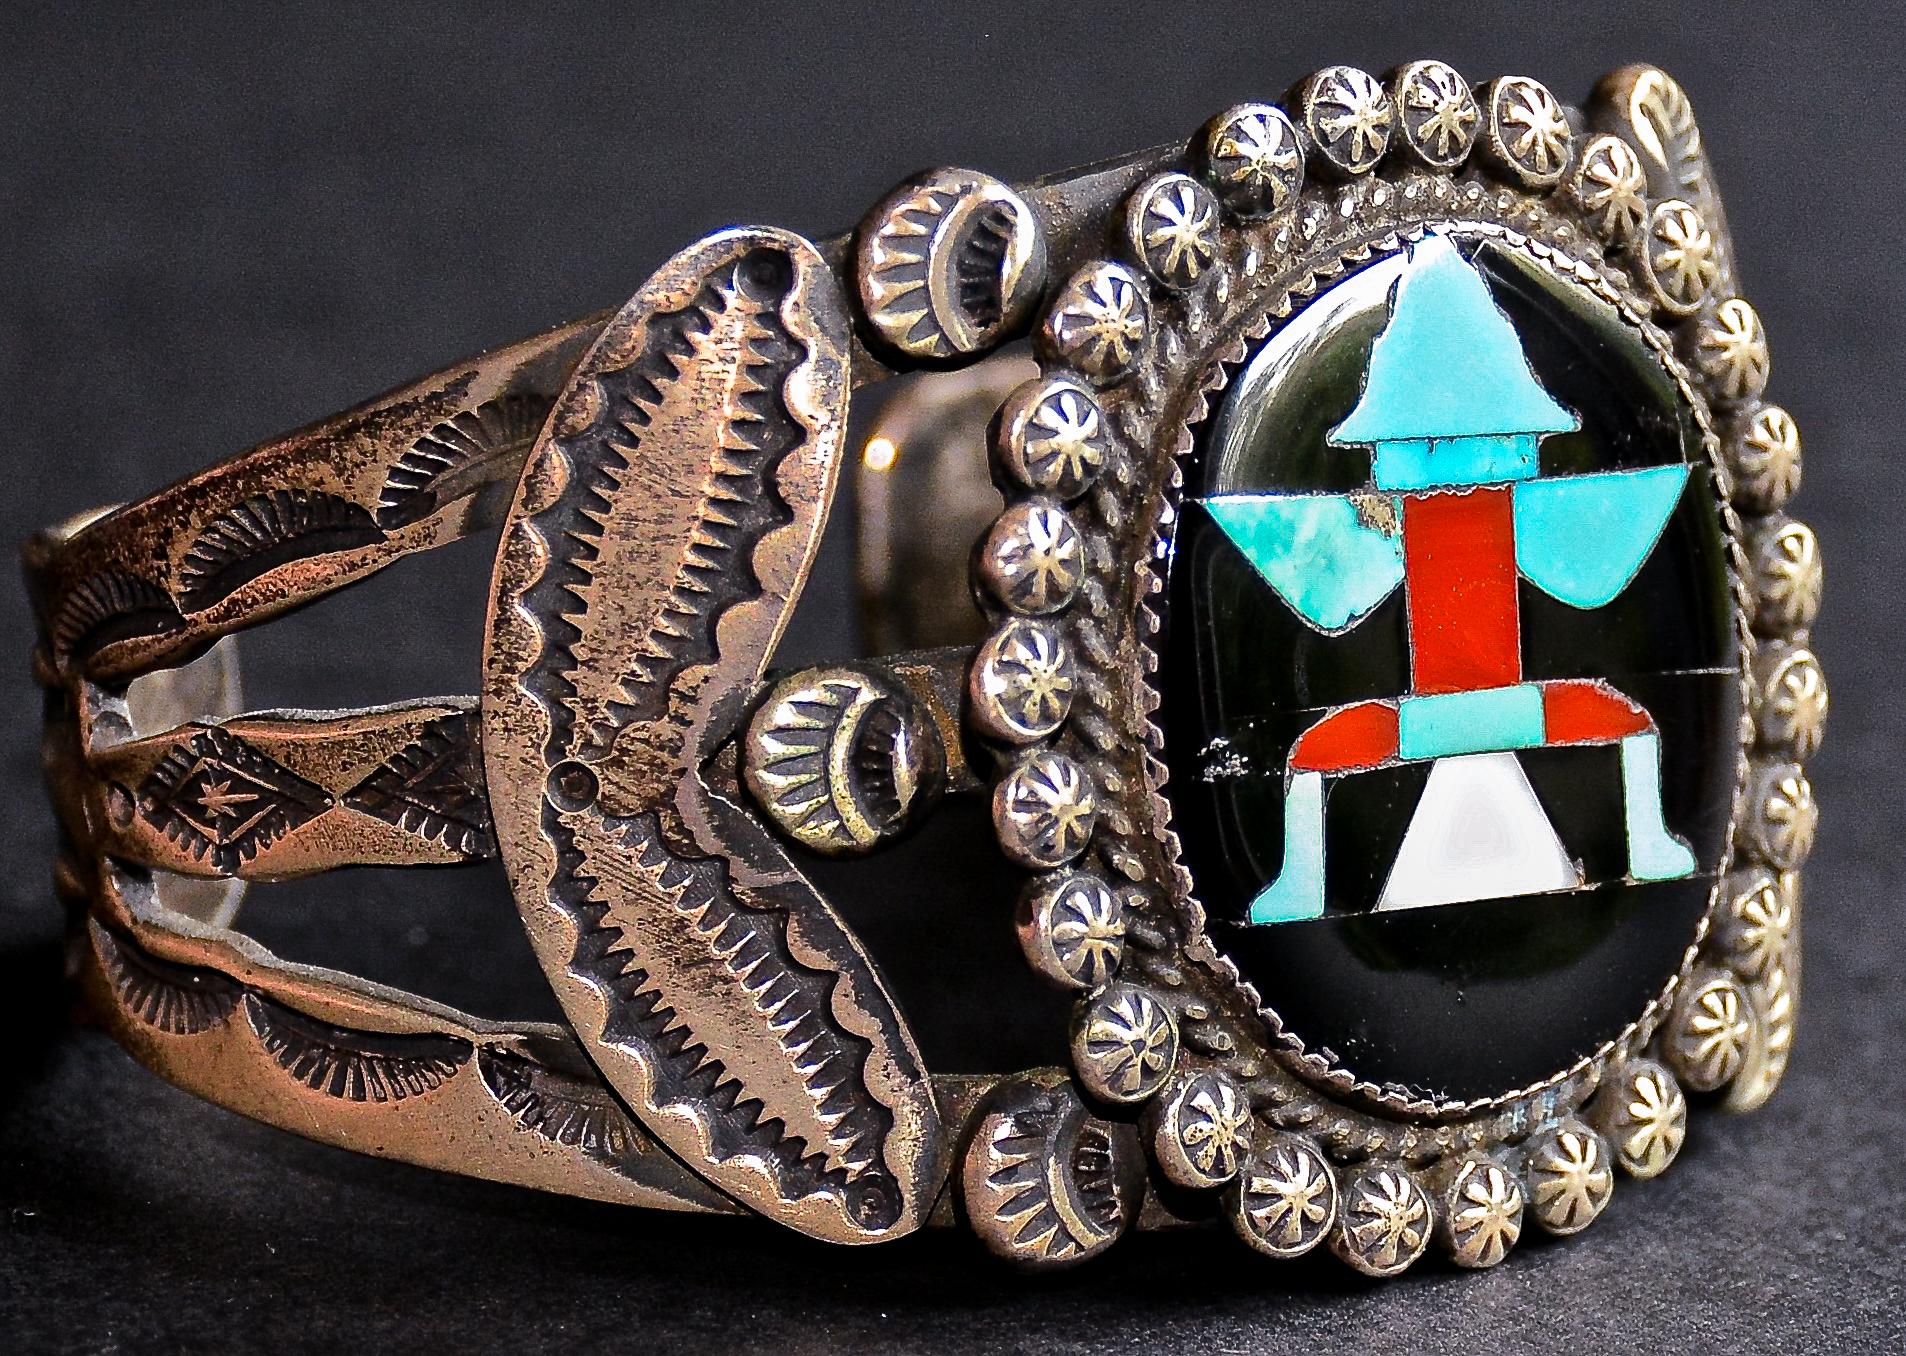 Strikingly beautiful historic Knife Wing design inlaid sterling silver cuff bracelet set with natural turquoise, spiny oyster shell, and mother of pearl inlaid into a black jet background. Made by the Zuni Master John Gordon Leak, also known as J.